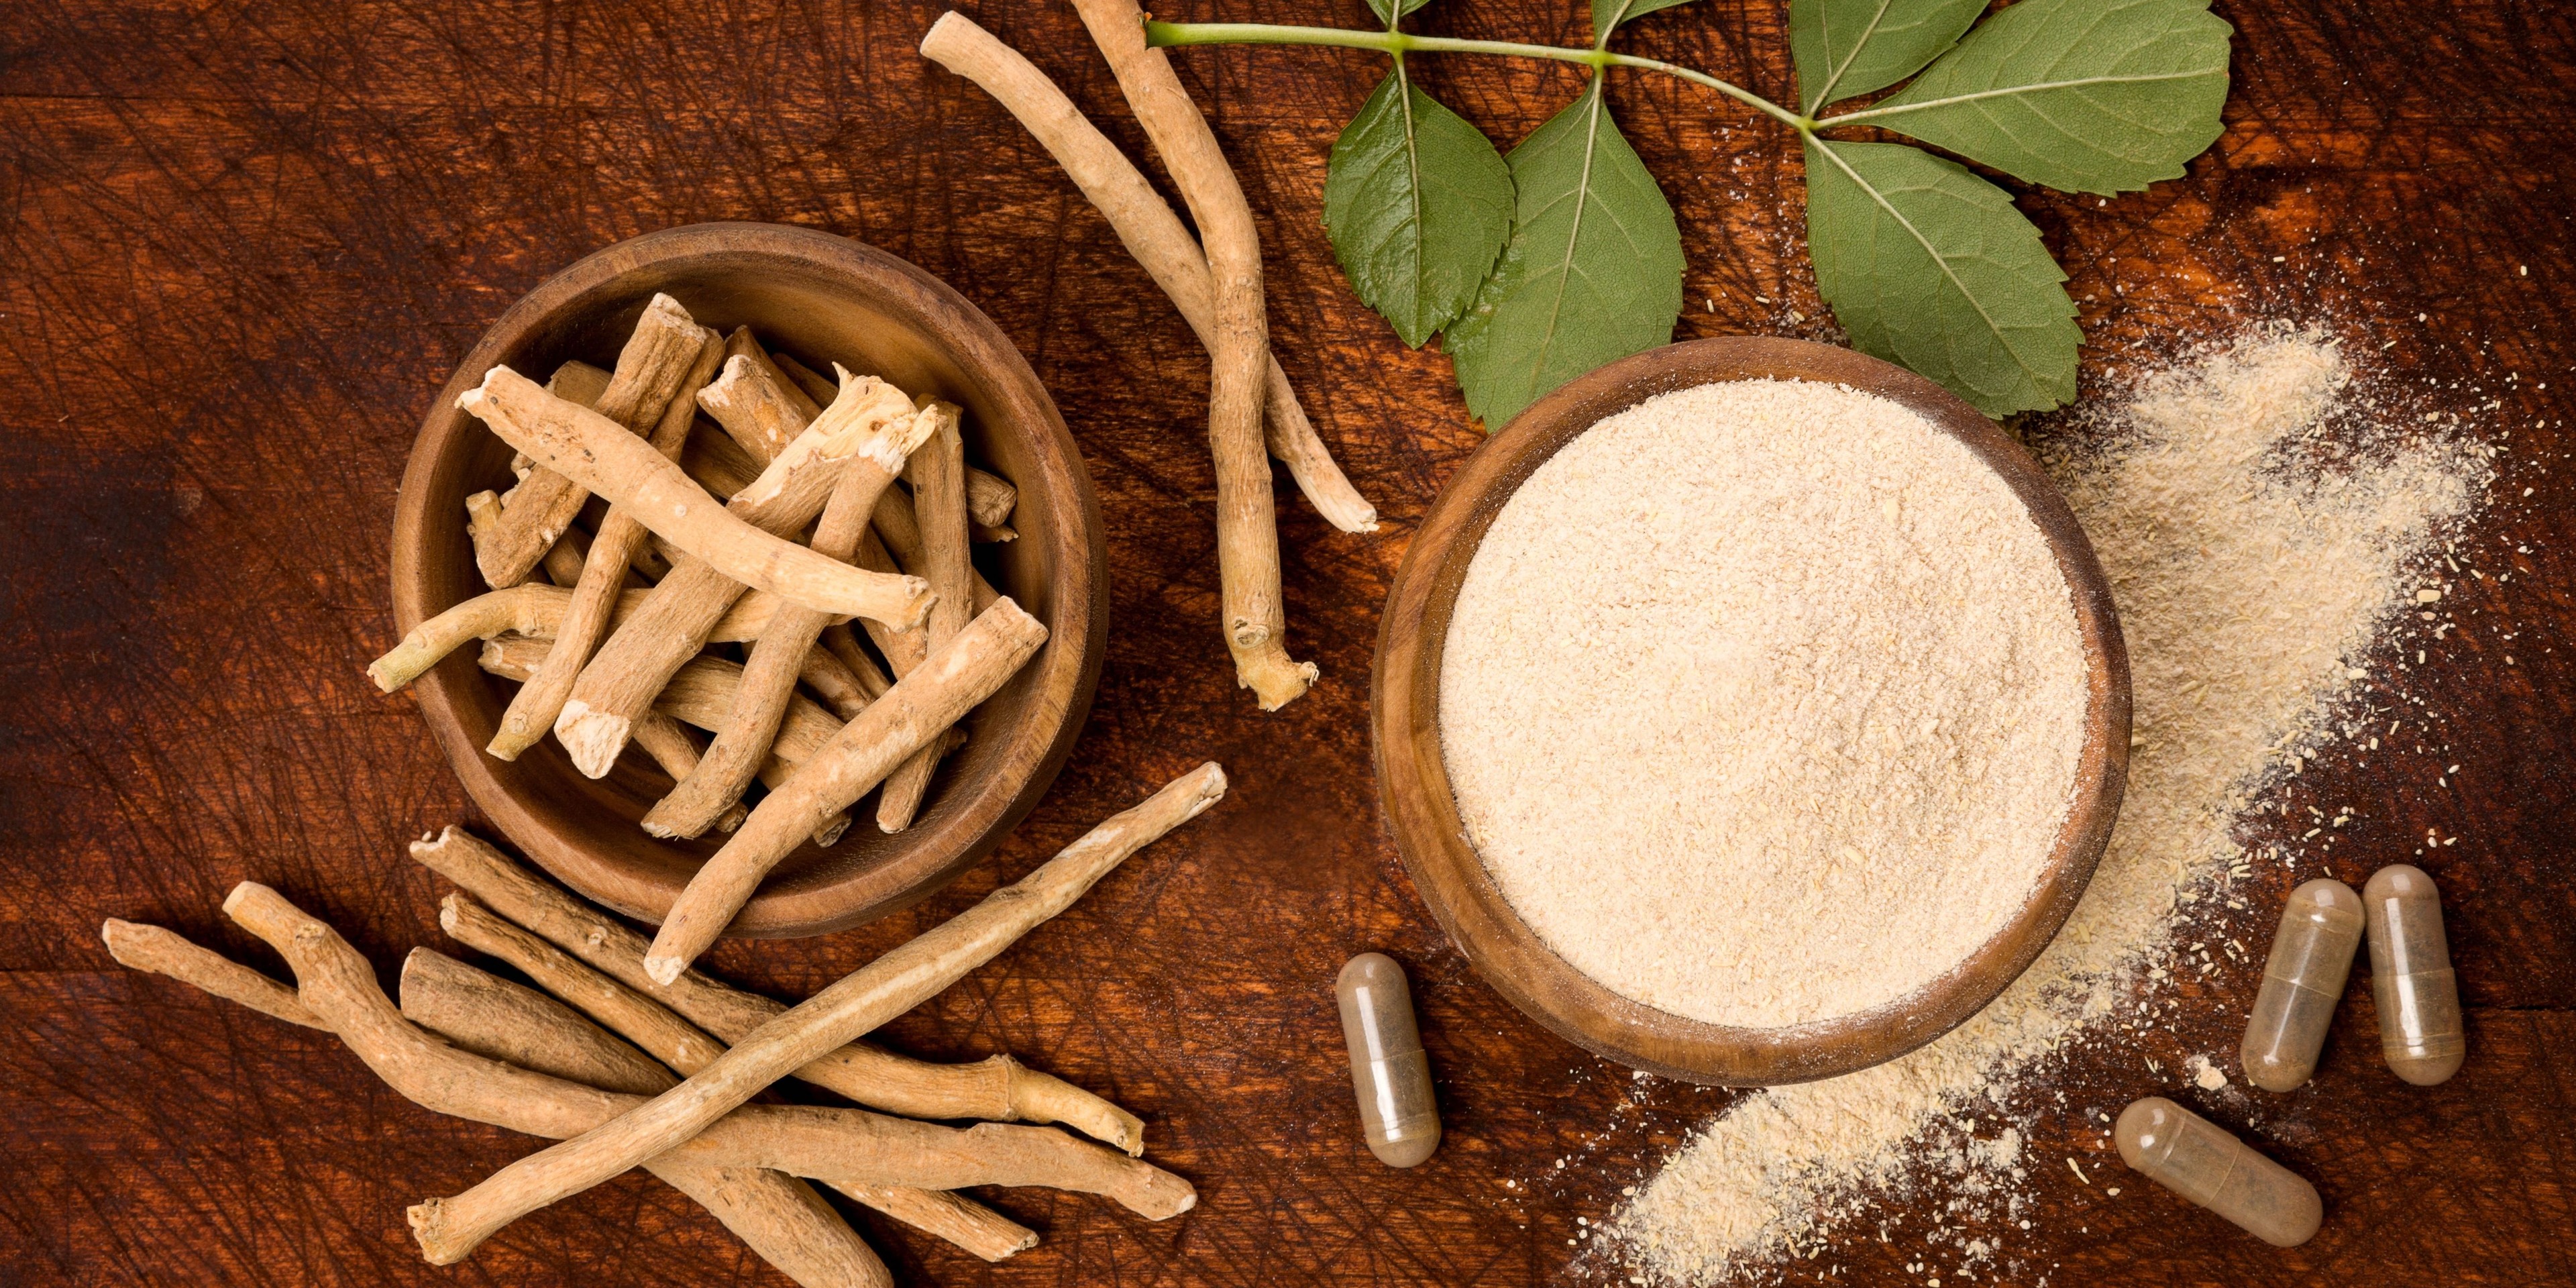 Ashwagandha roots in a wooden bowl next to powder in a wooden bowl with some capsules nearby